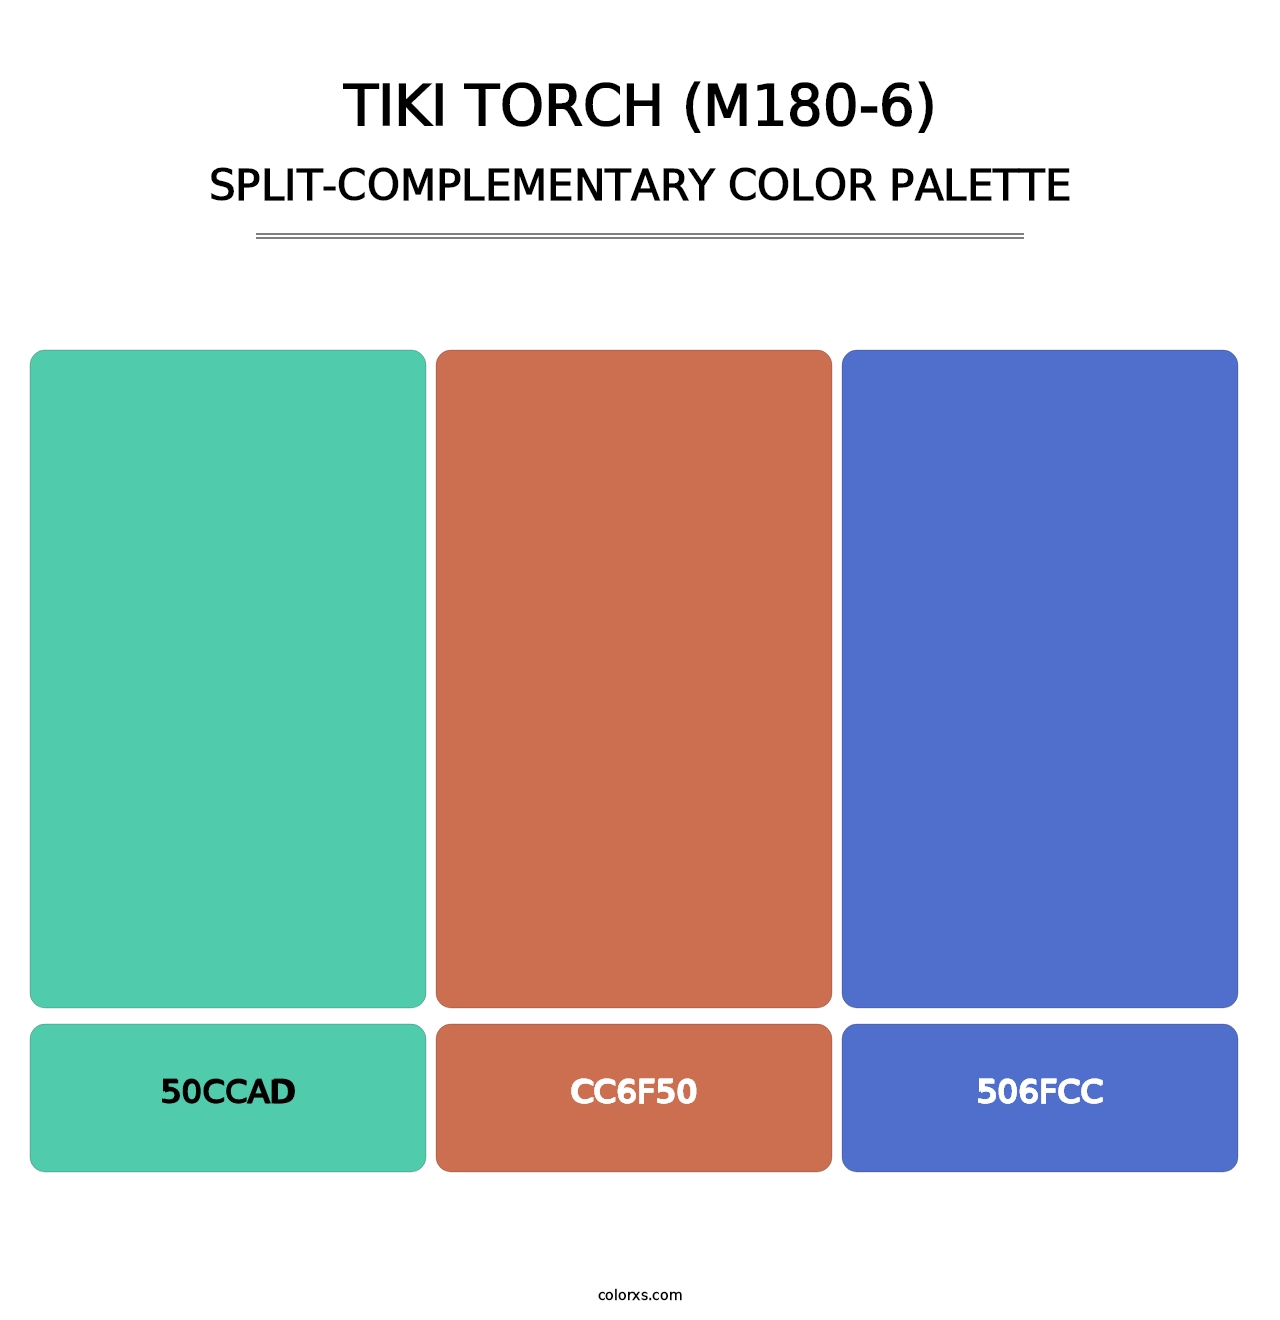 Tiki Torch (M180-6) - Split-Complementary Color Palette